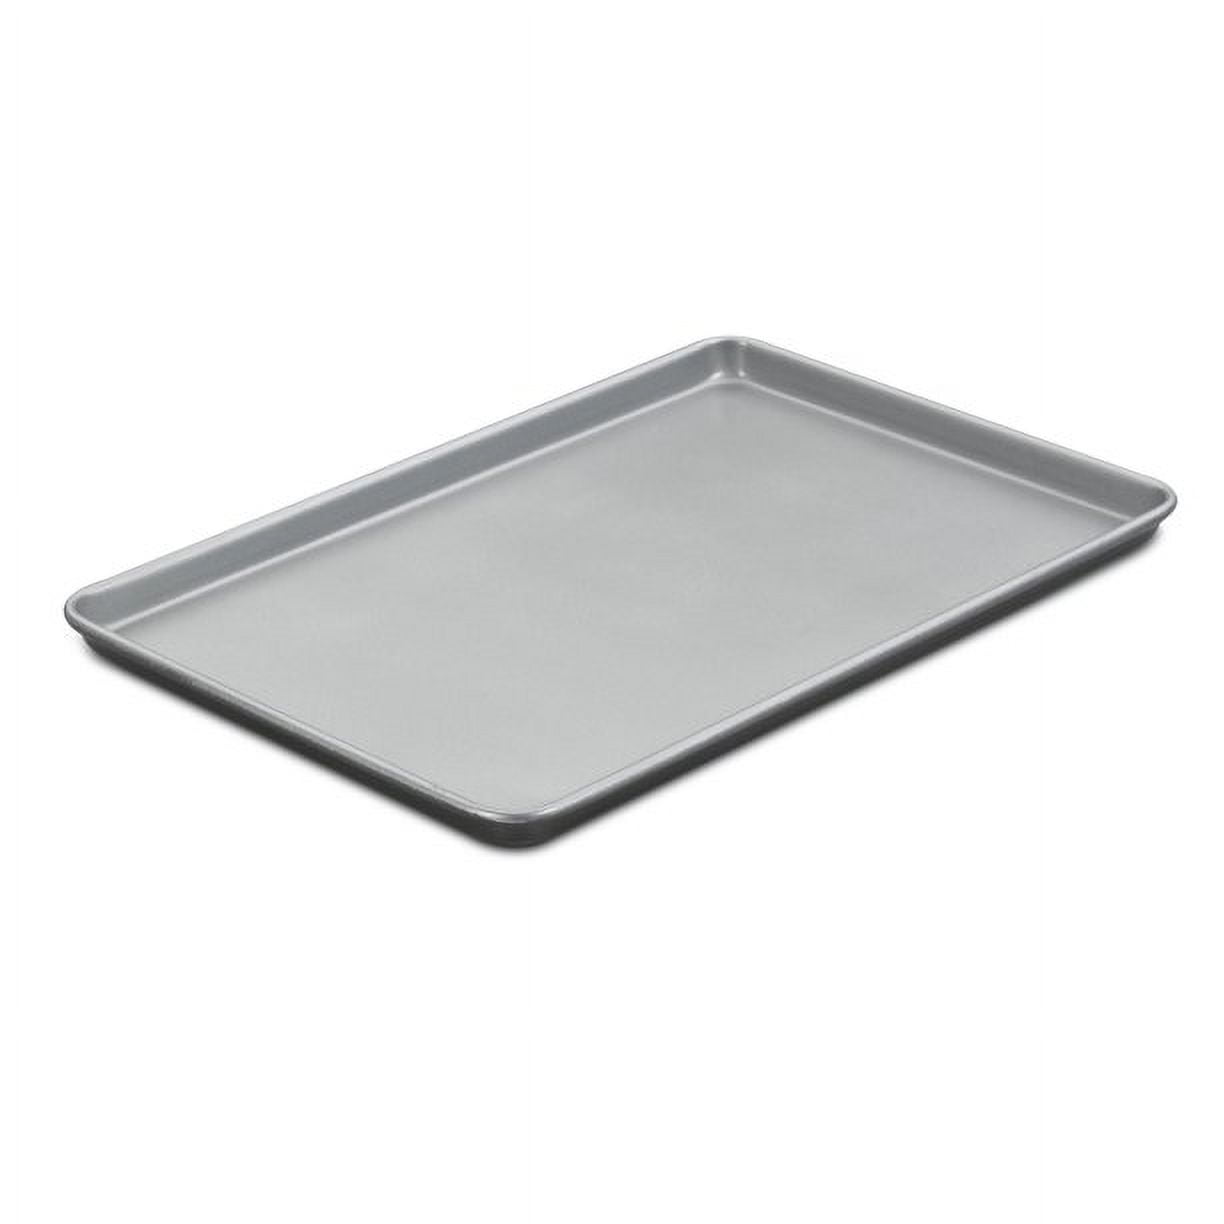 Cuisinart 17-Inch Non-Stick Aluminum Baking Sheet with Silicone